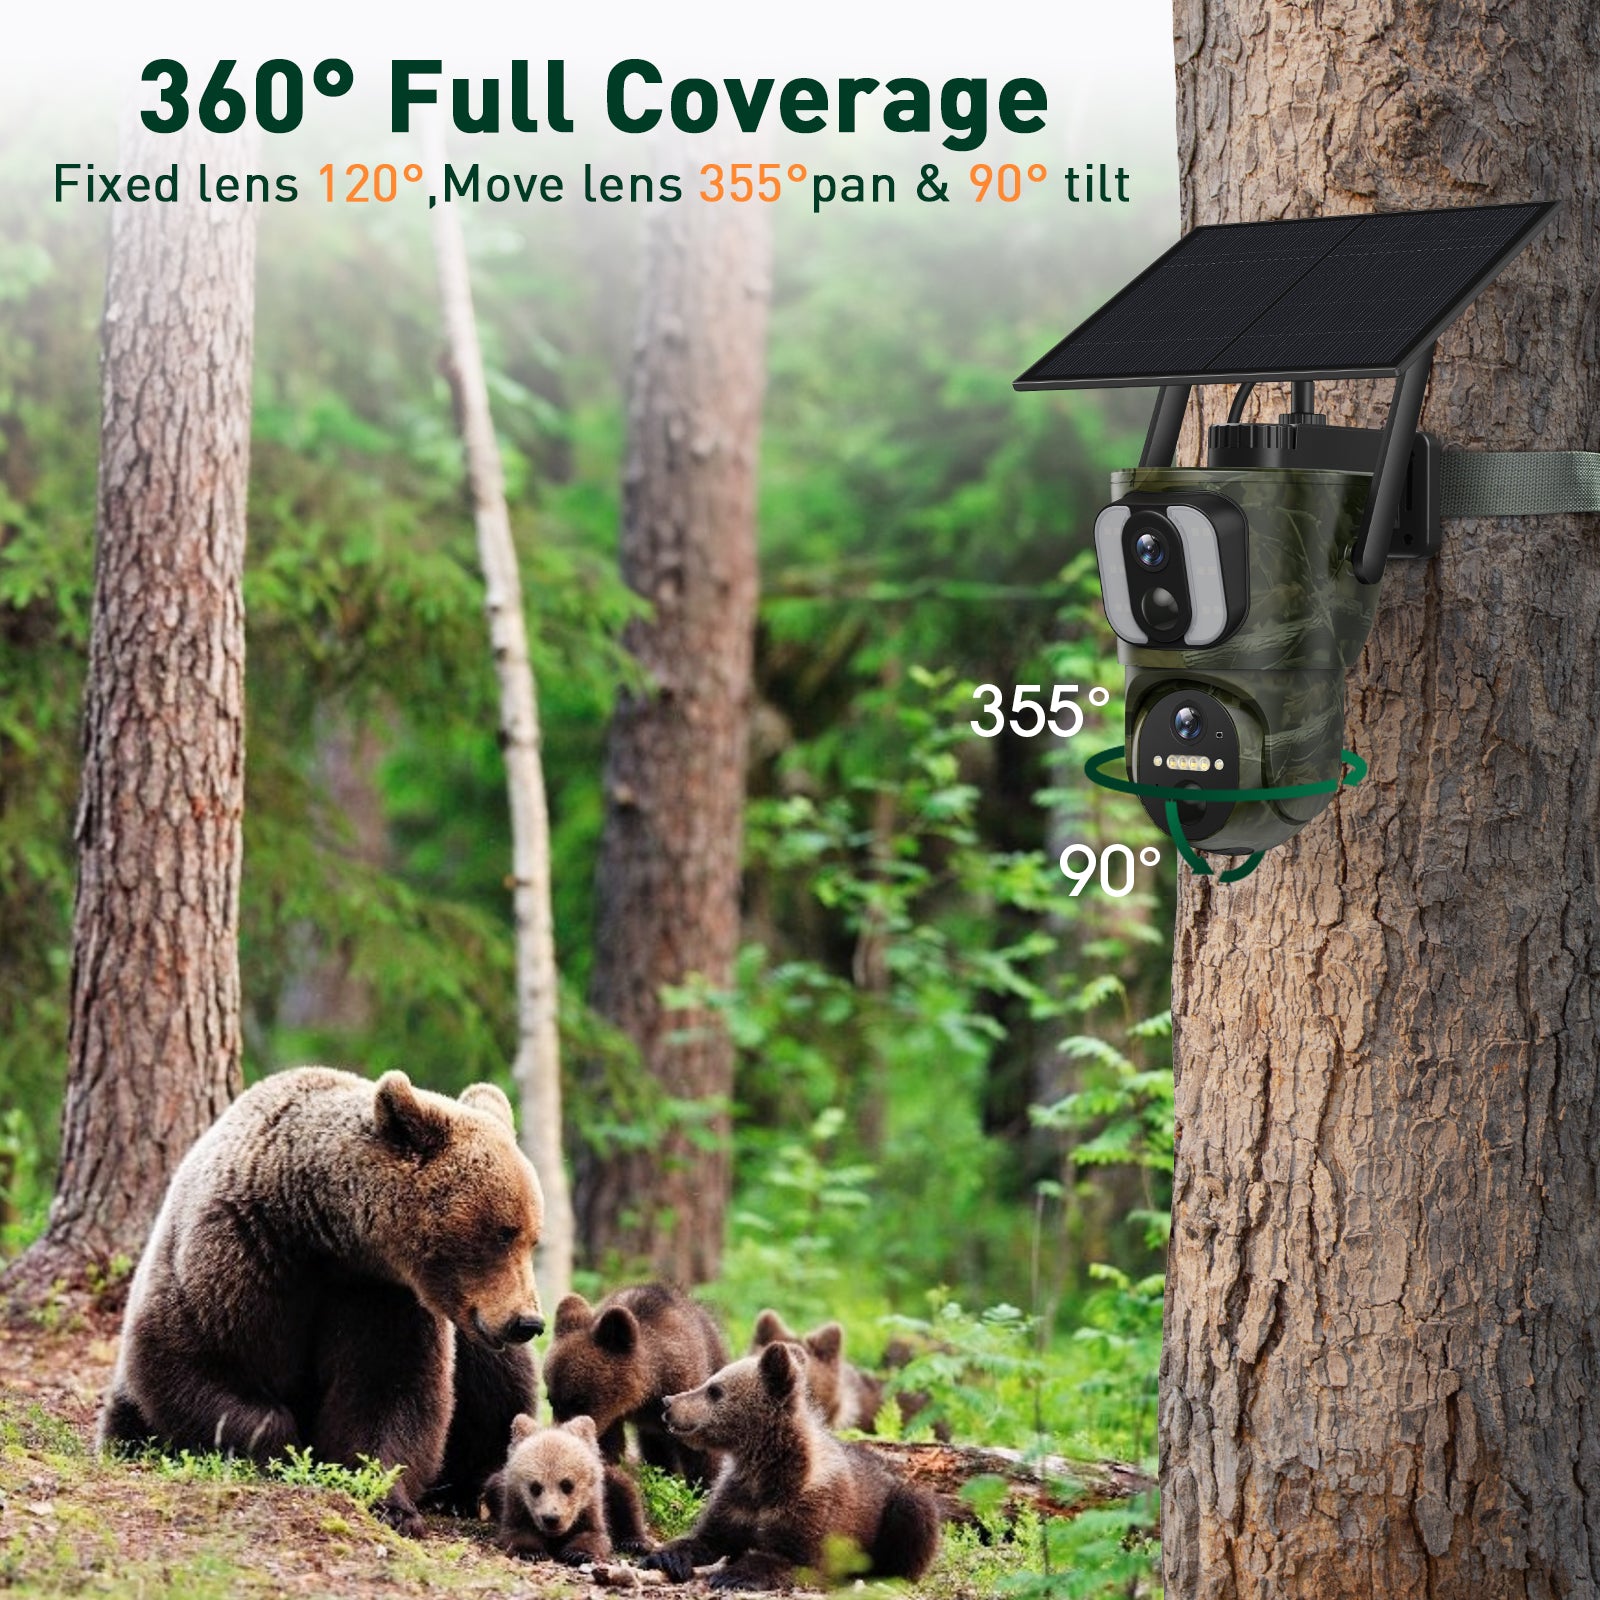 4G LTE 1080P Dual Lens Trail Camera with Solar Power Panel, Watch in Real Time and No WiFi Limited, PIR Motion Detection